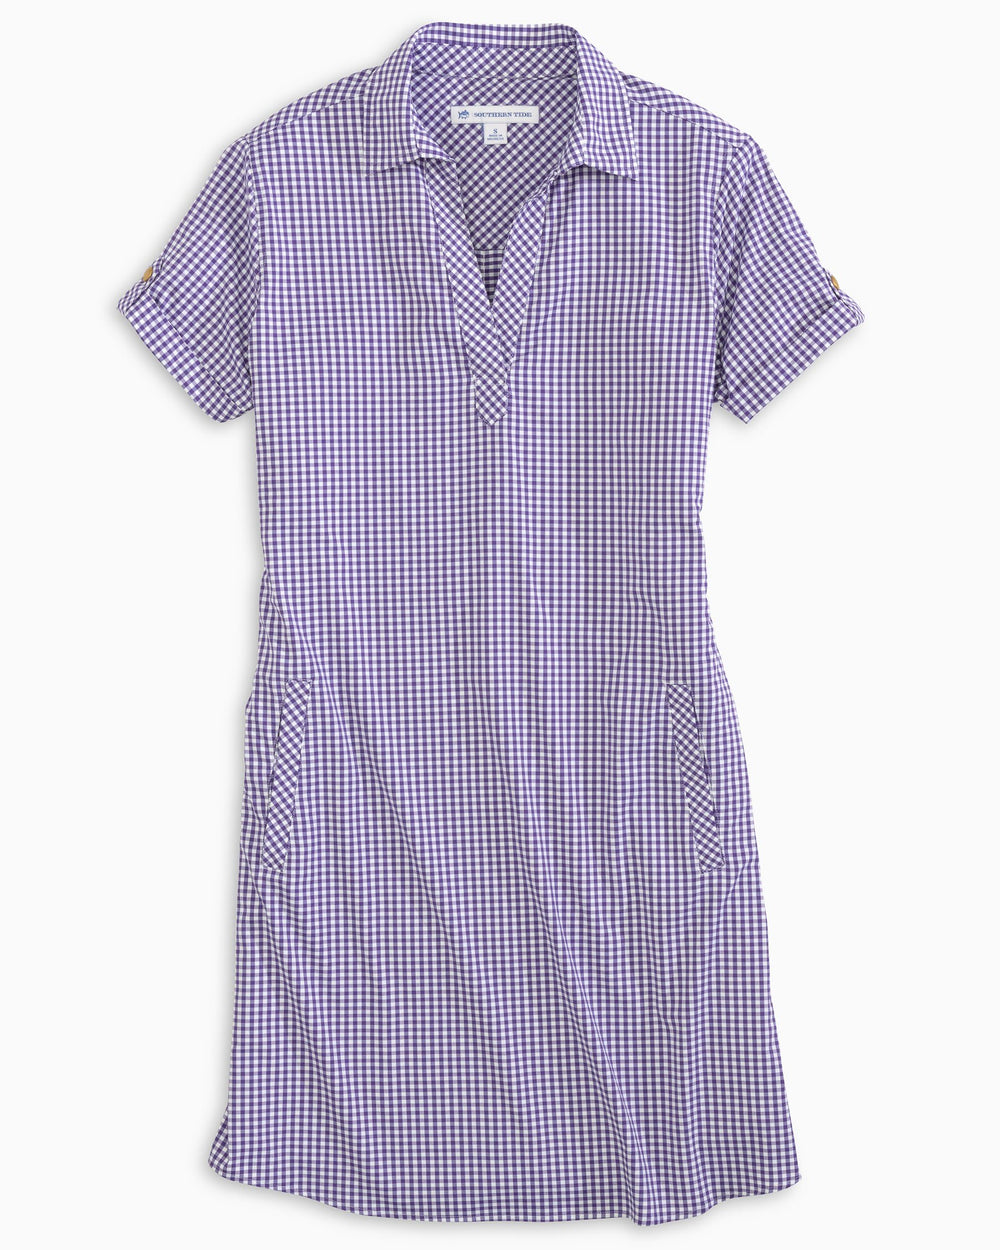 The front of the Women's Gameday Kamryn Intercoastal Shirt Dress by Southern Tide - Regal Purple